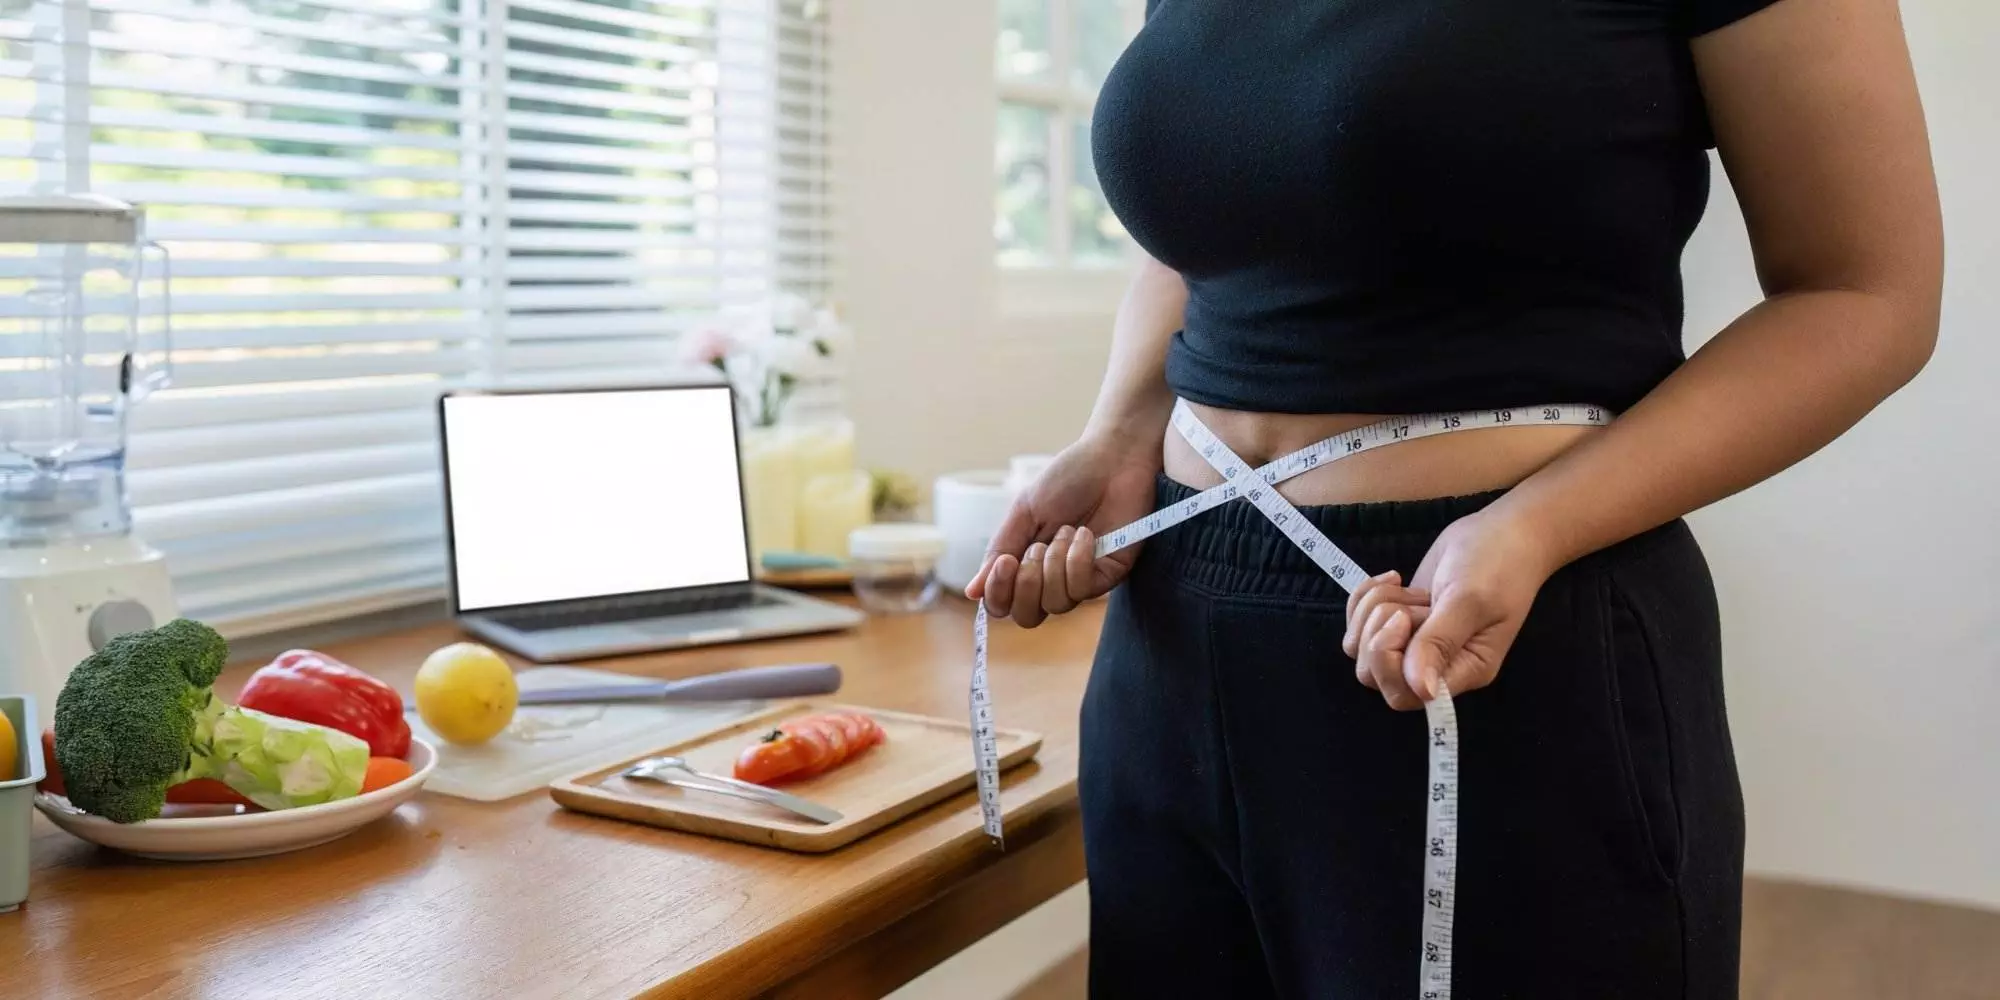 Person measuring waist in kitchen with healthy food.